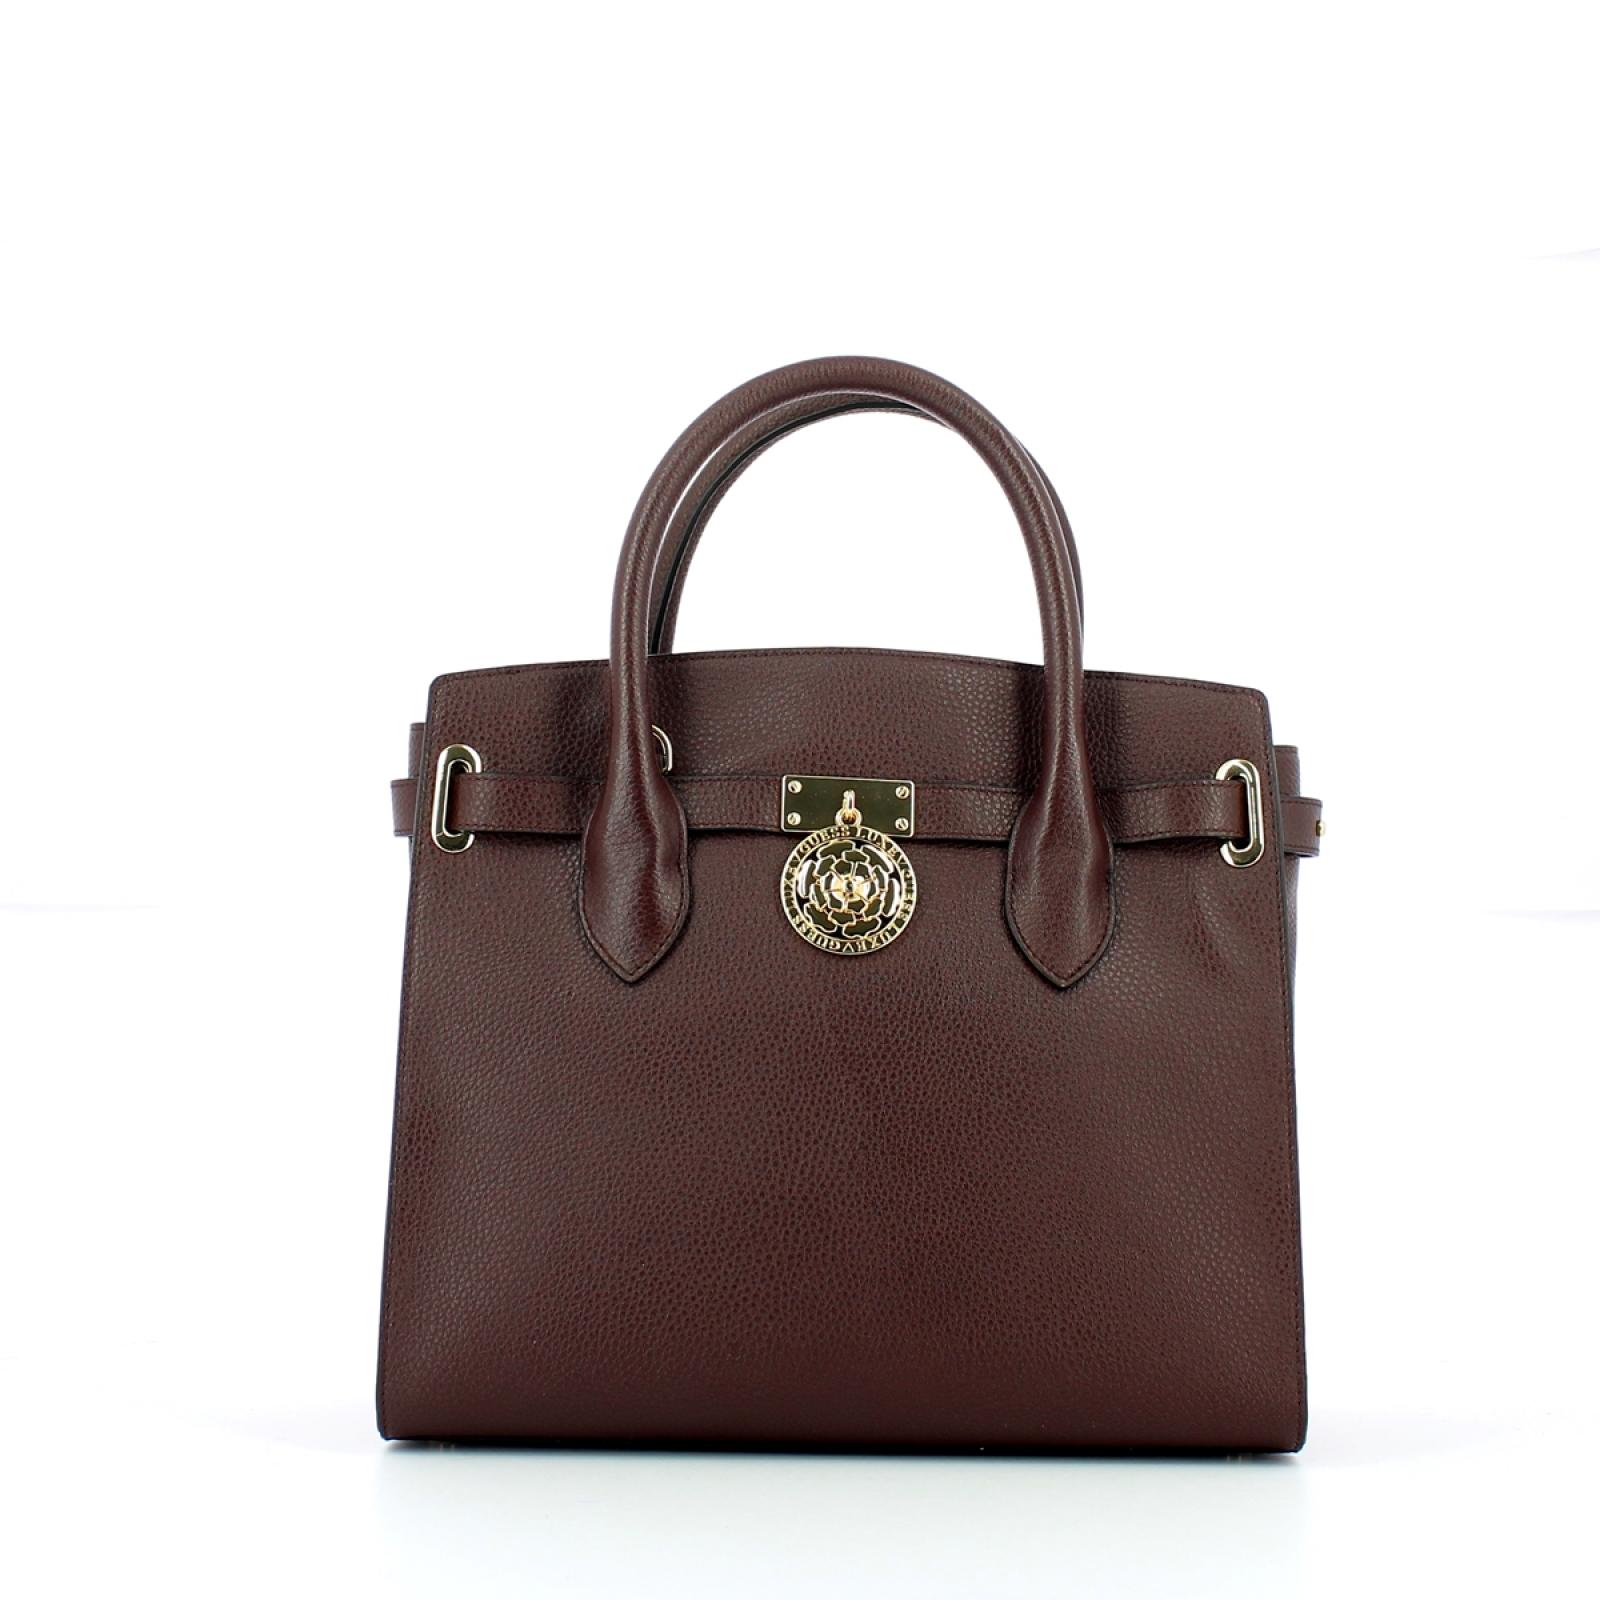 Guess Borsa a mano Peony in pelle - 1